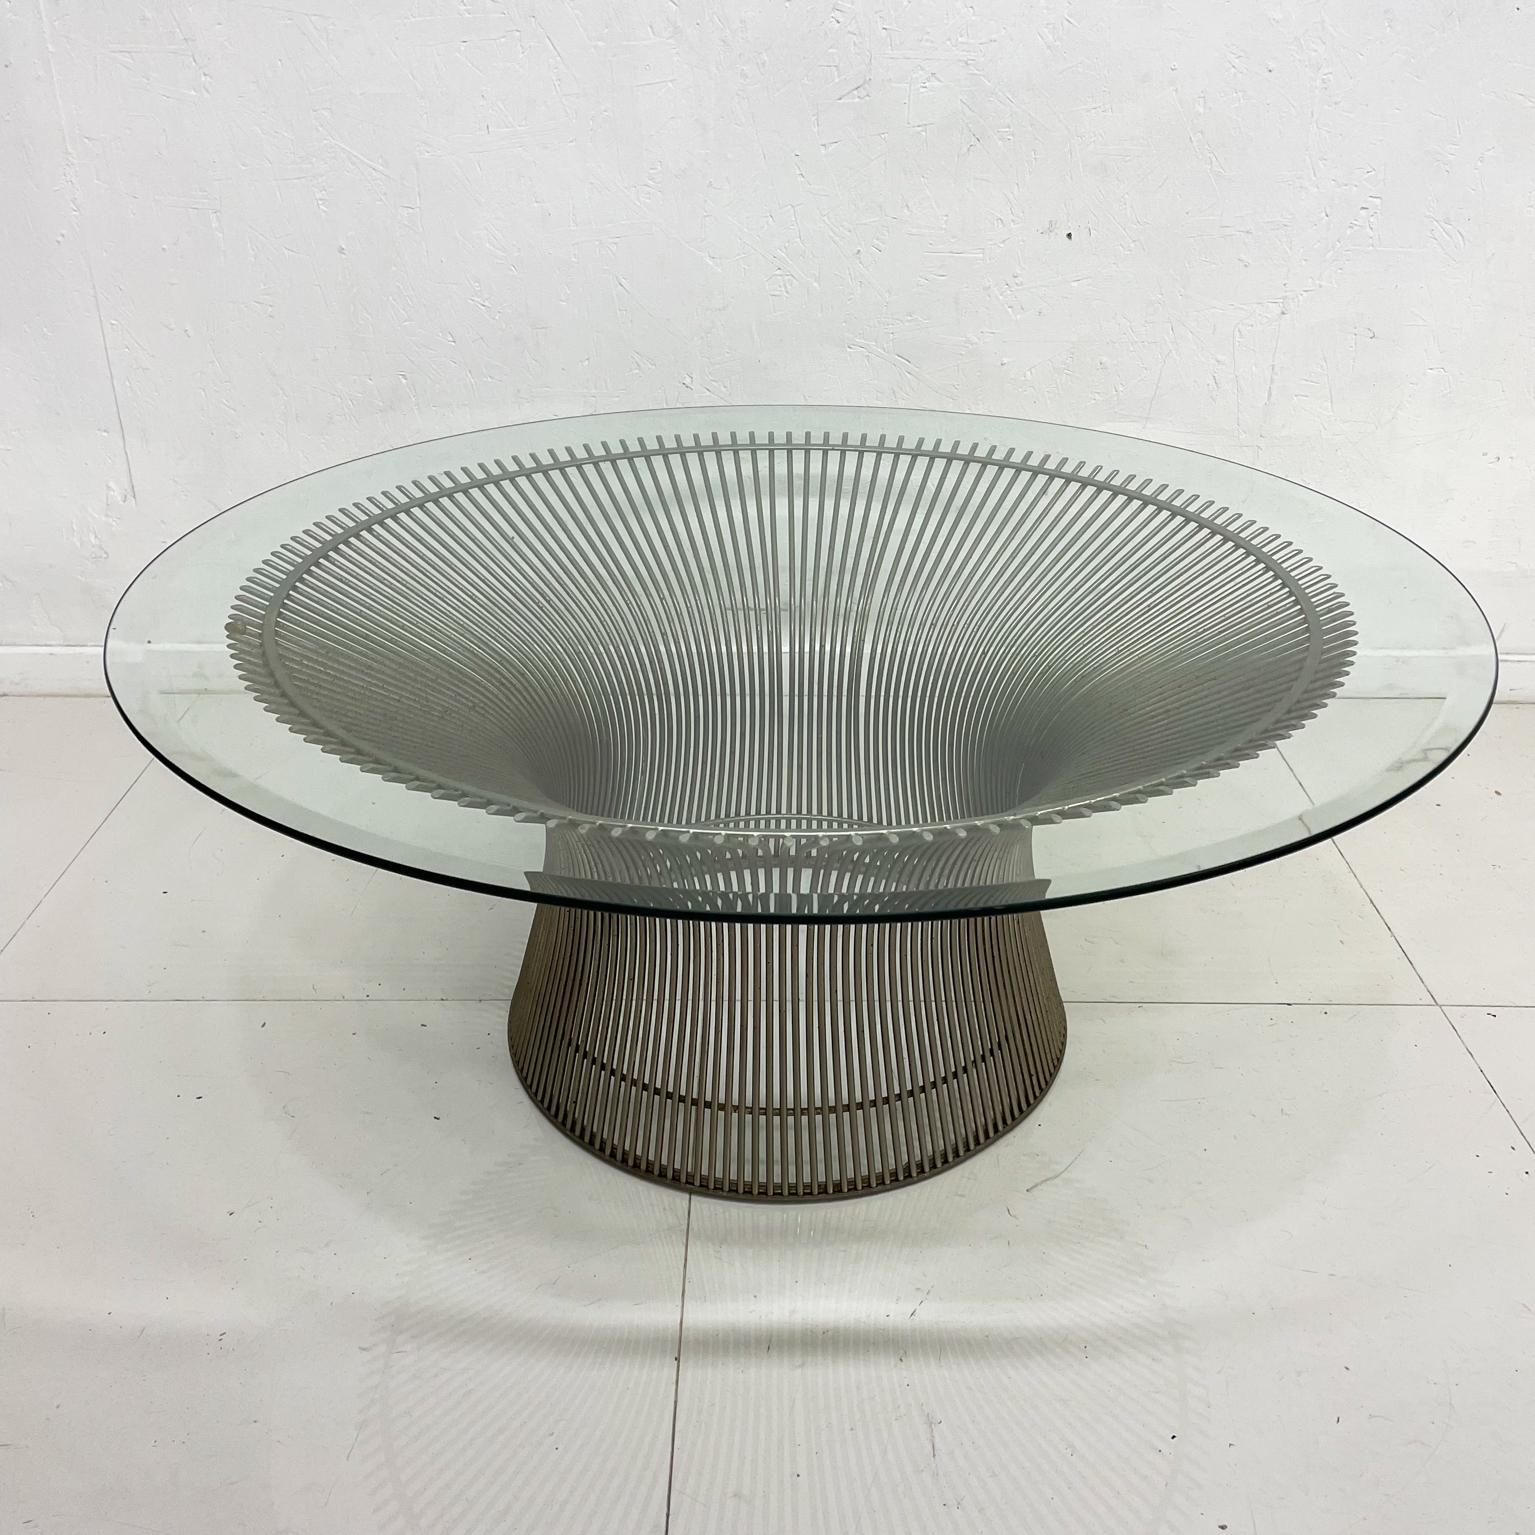 Coffee table
1970s Warren Platner elegant modern round coffee table.
Designed with metal wire and a glass top.
Vintage presentation with patina. Unmarked, attribution Warren Platner.
Dimensions glass 36 diameter and 15 h base 30